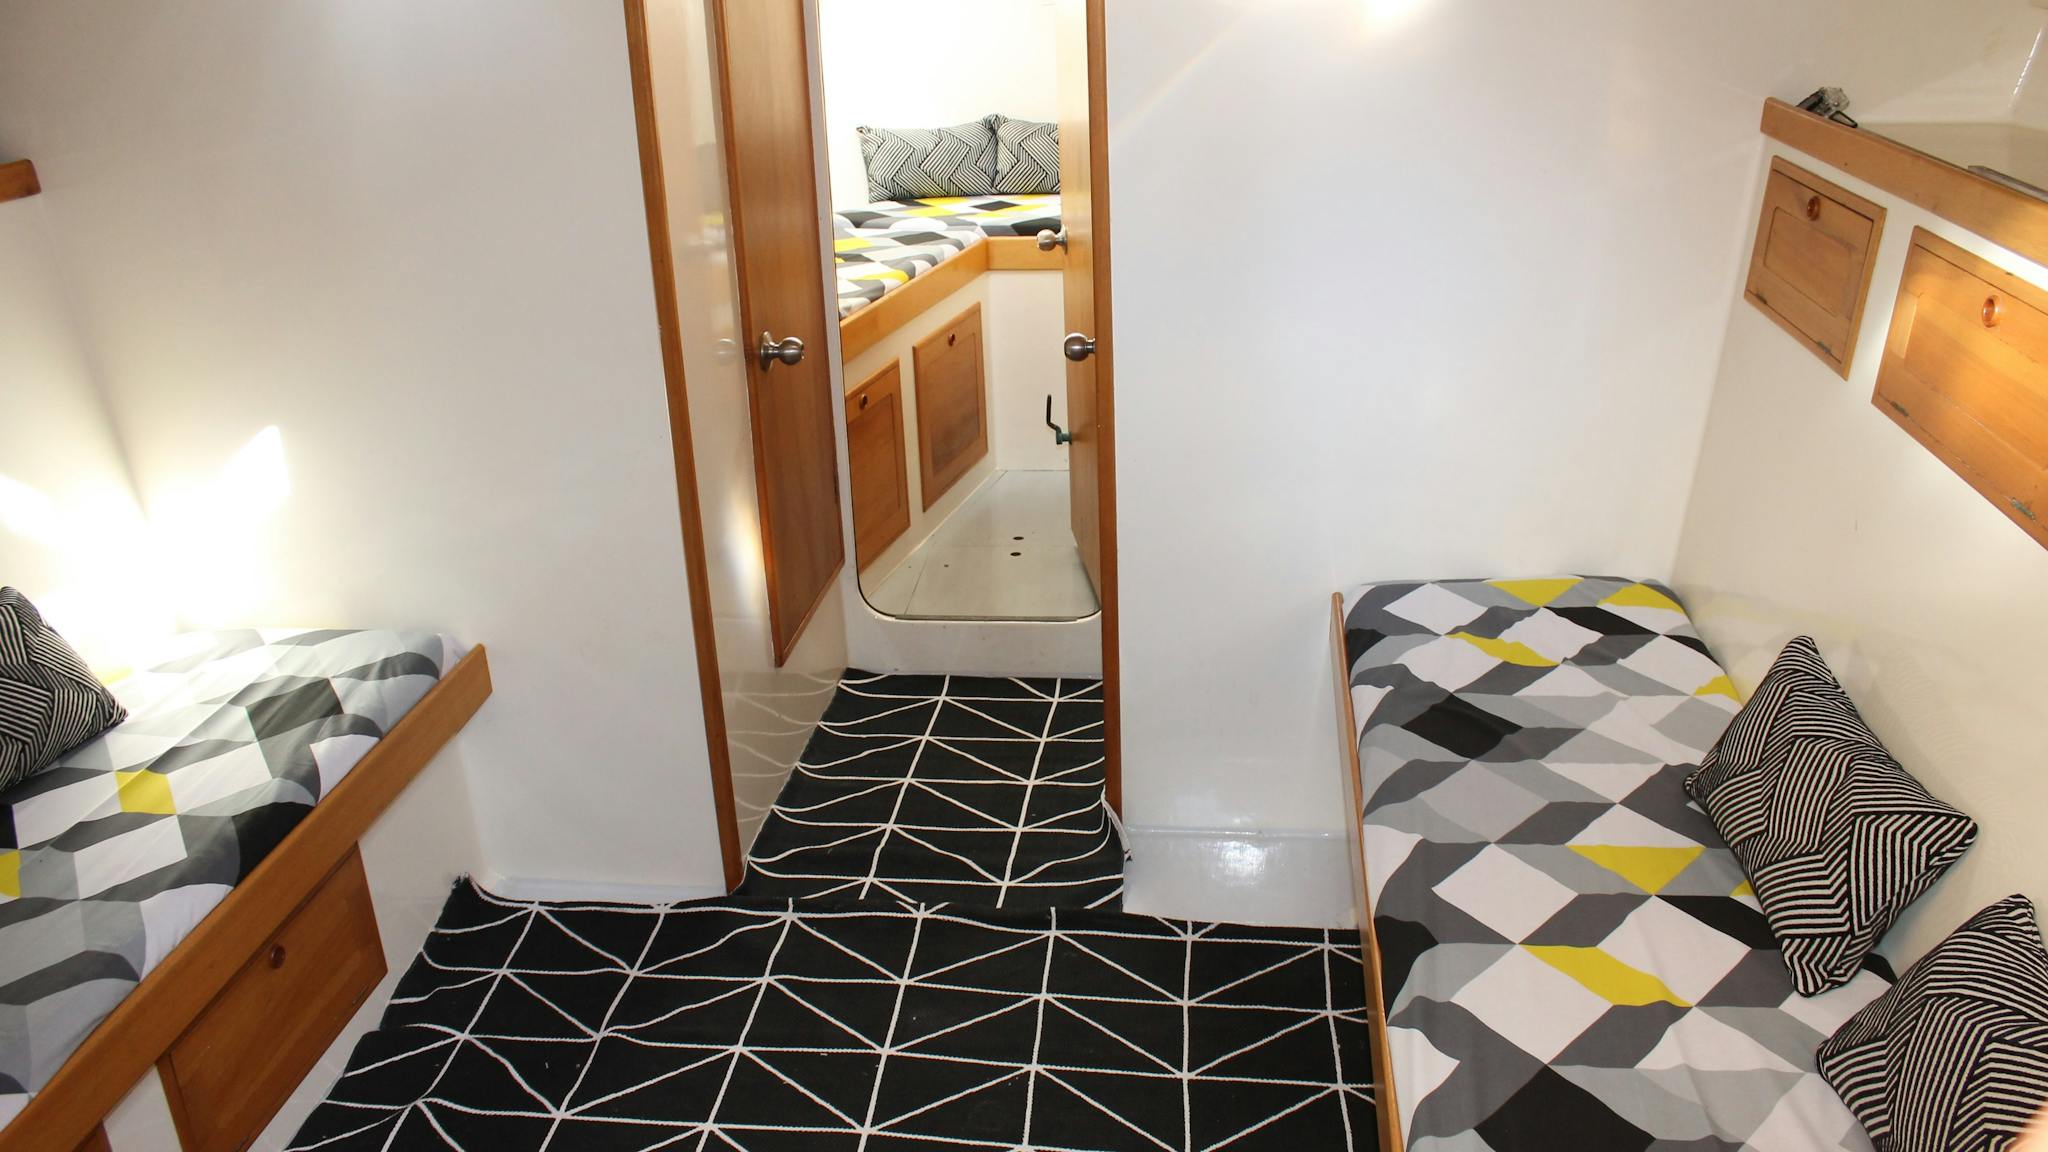 Separate toilet, shower and accommodation areas